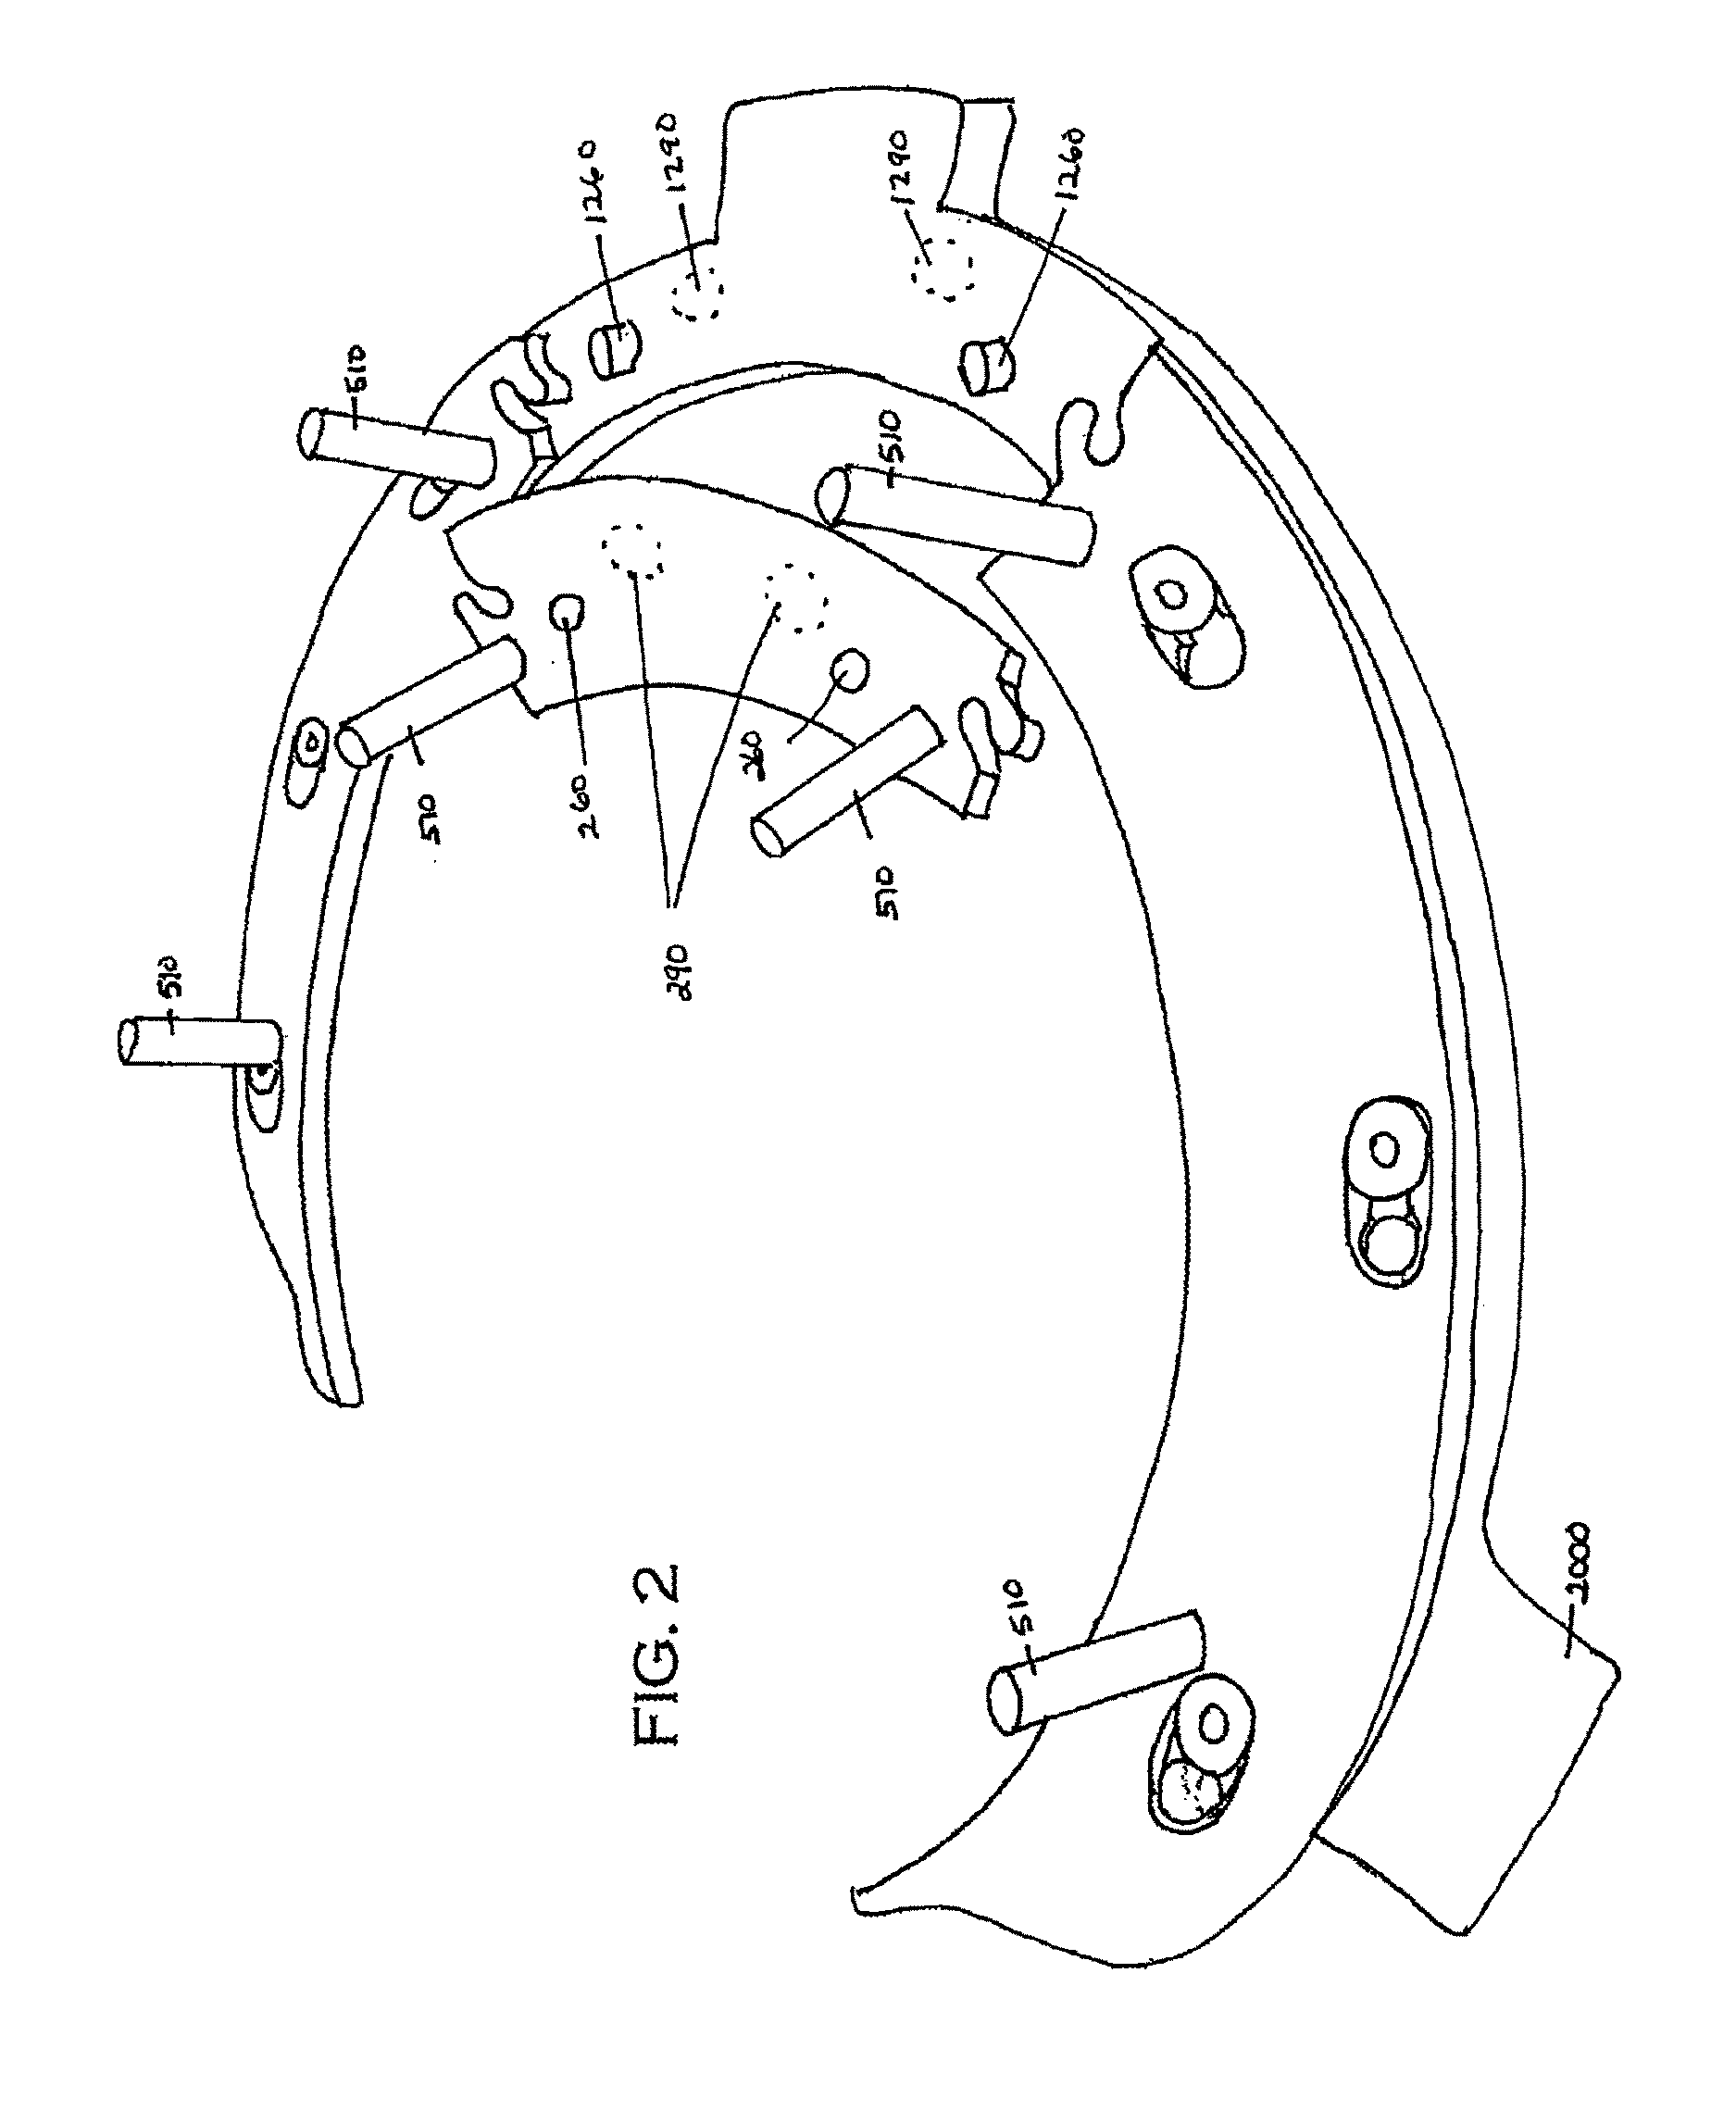 Magnetic fastening system and method for change parts